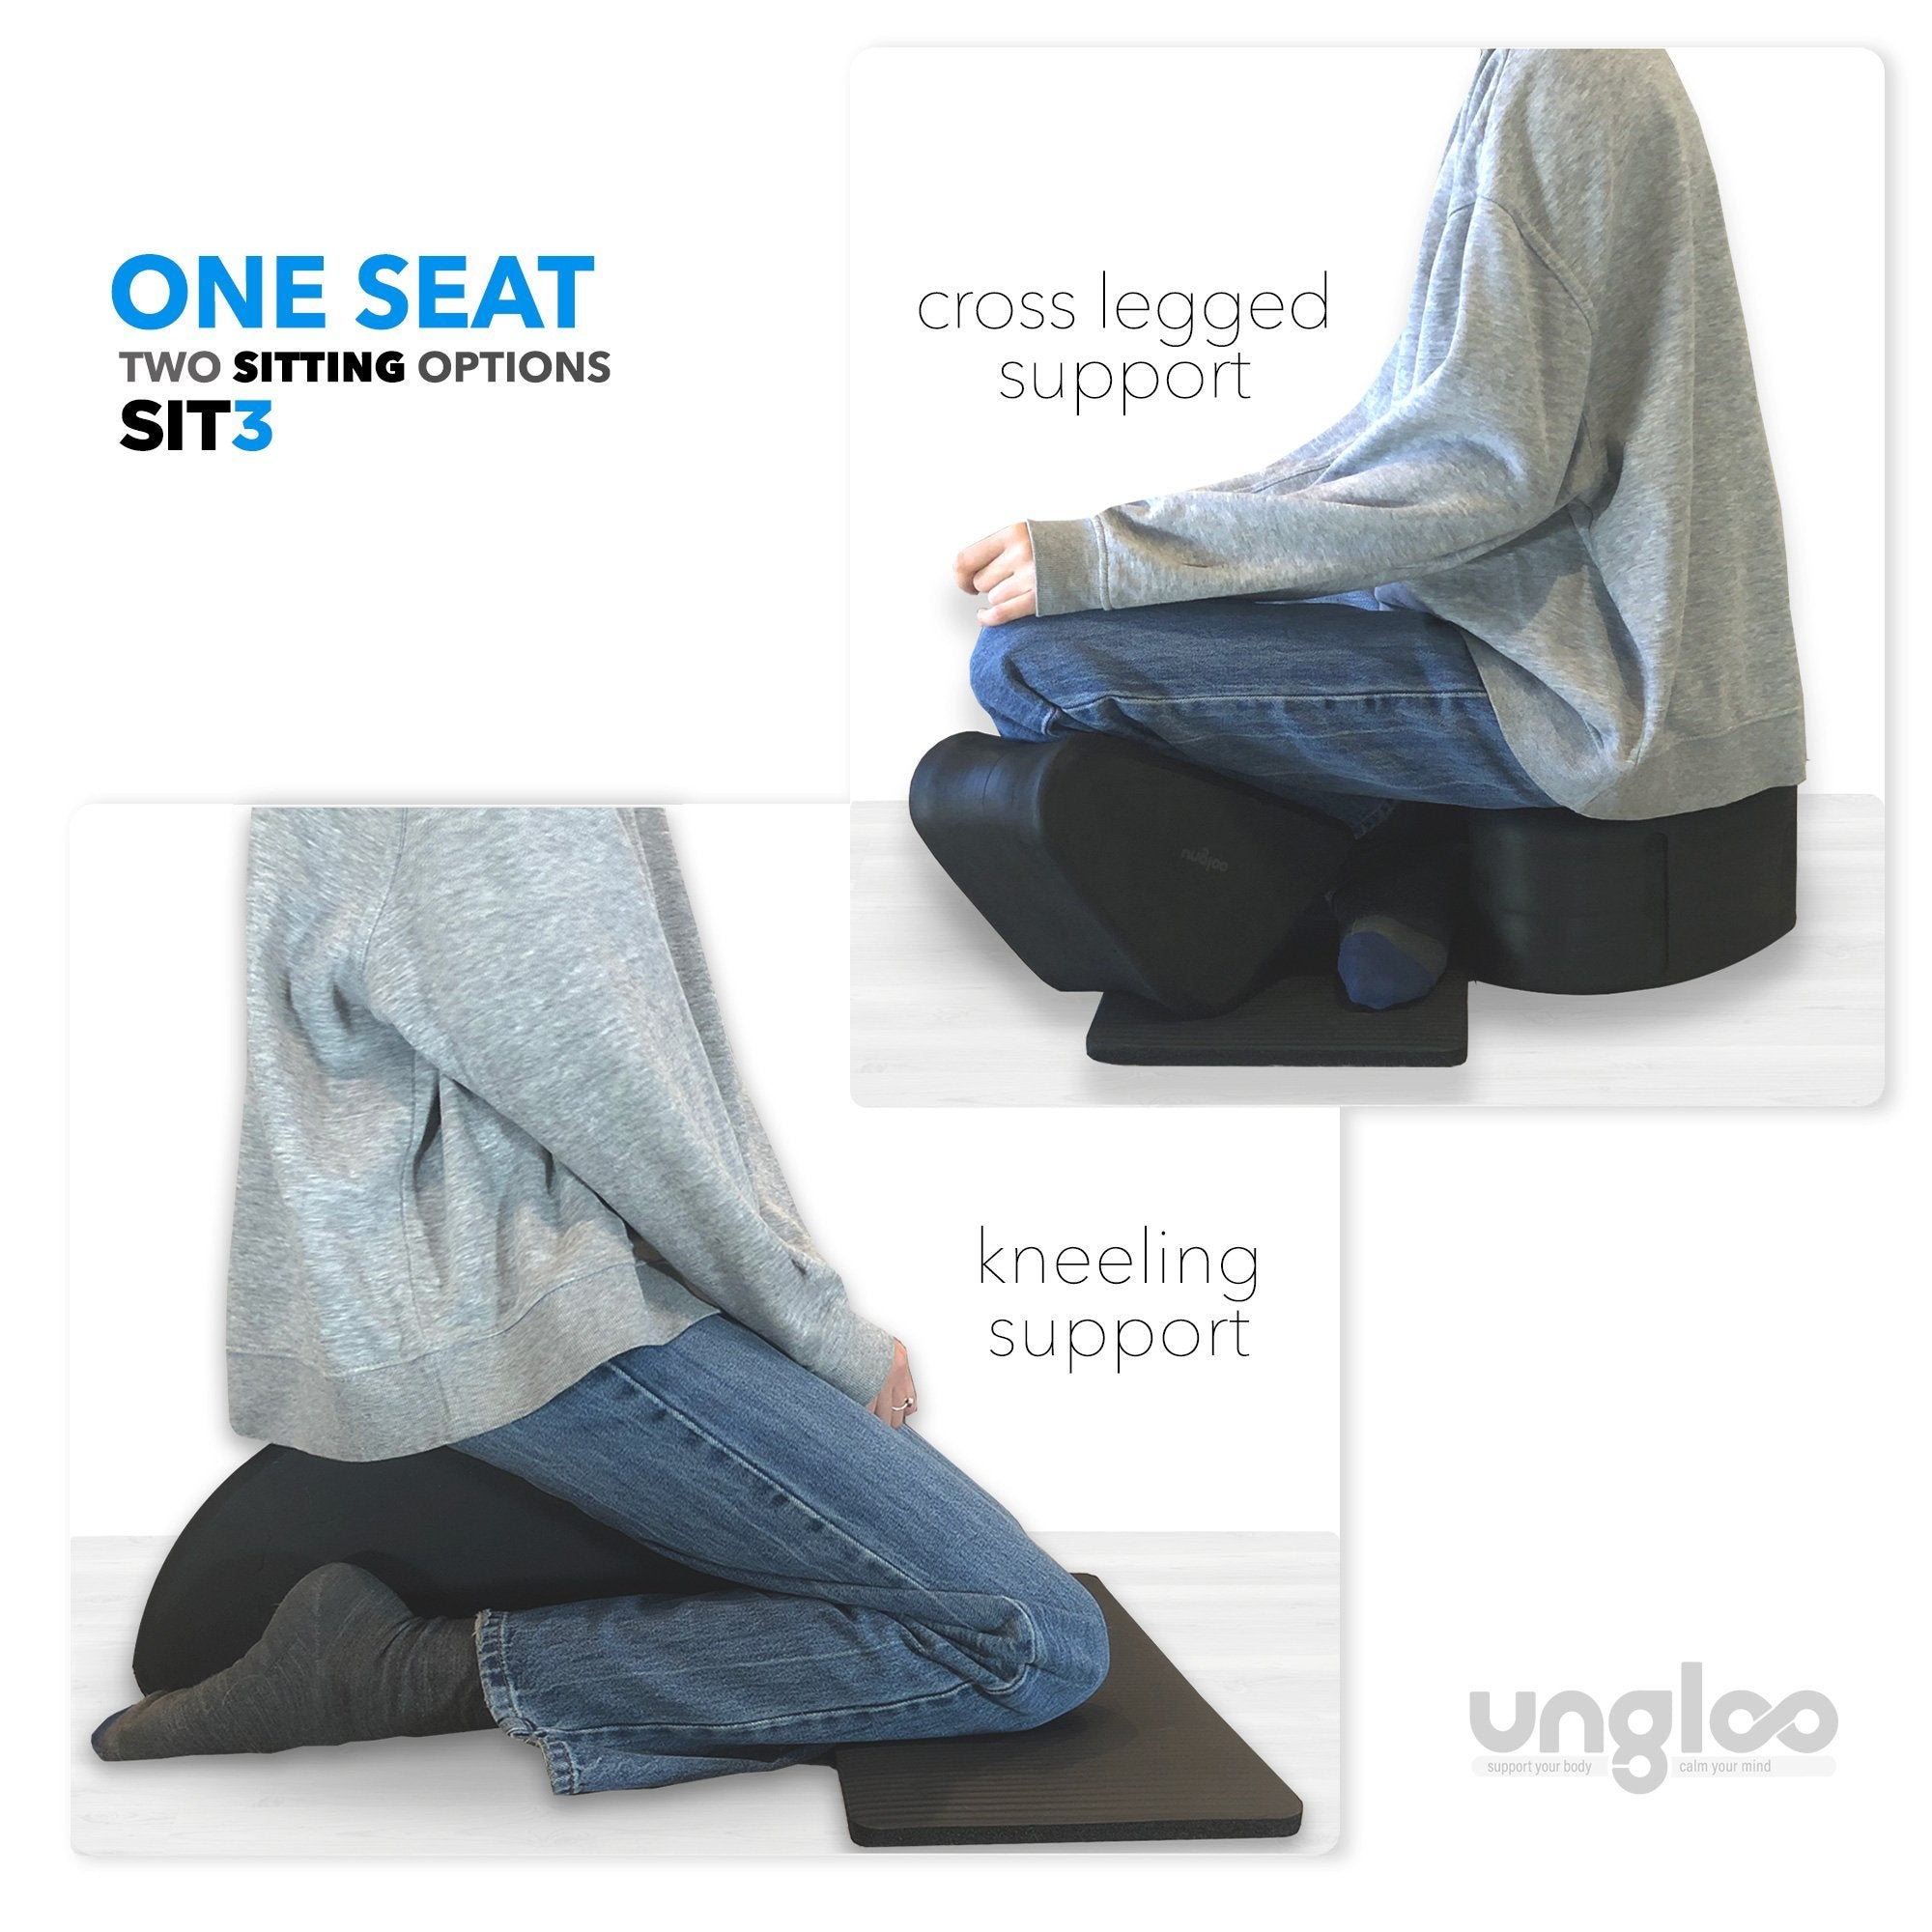 Image showing how to use the SIT3 while meditating in a kneeling or cross legged support